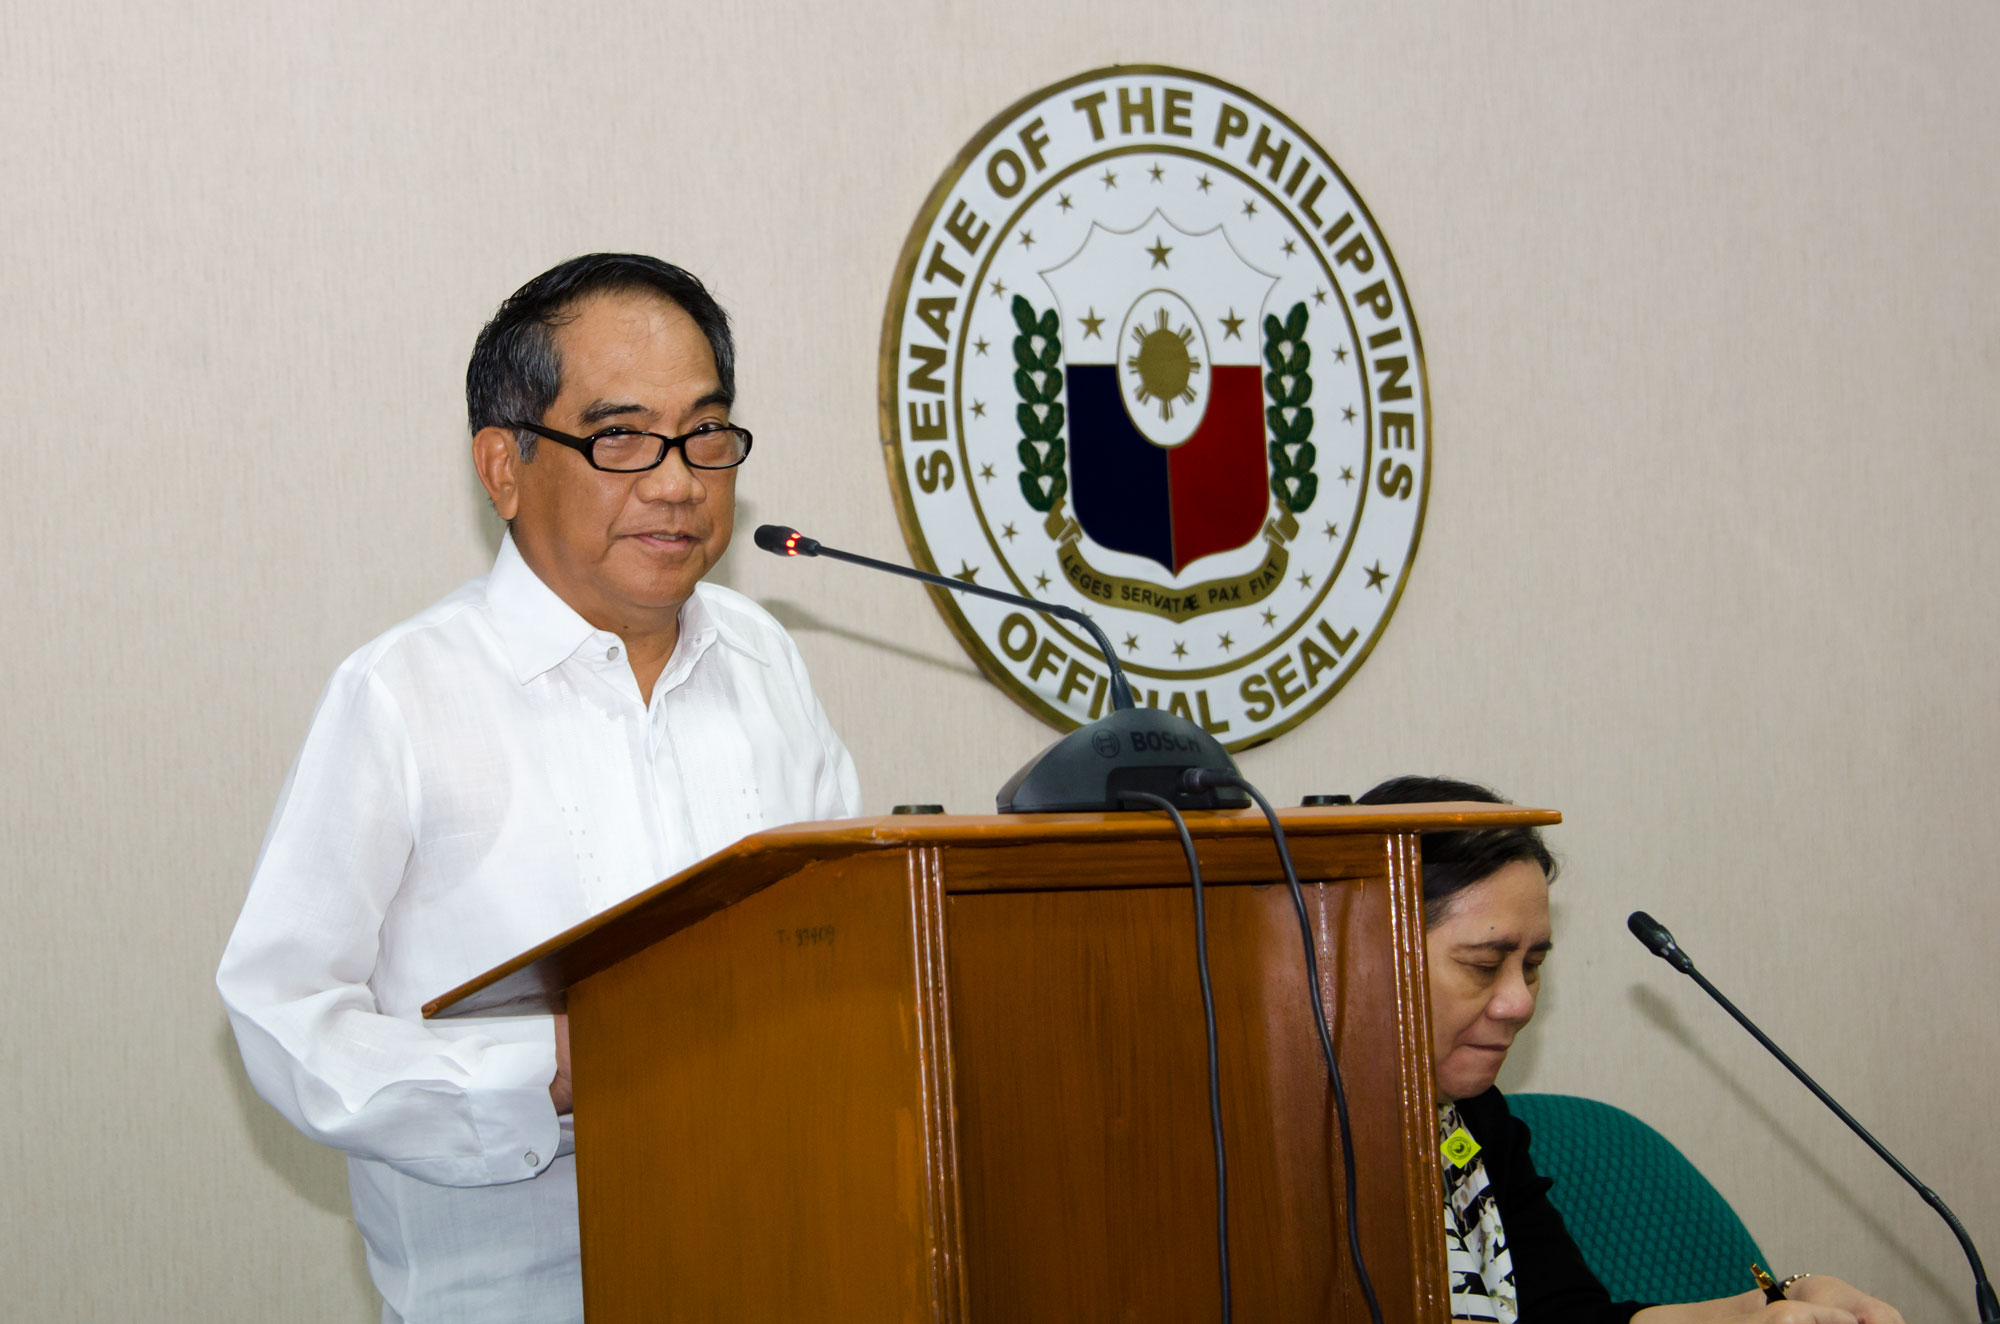 Senate Centennial Lecture Series “Assessment of the Bottom-up Budgeting Process for FY 2015-ggm_7856.jpg